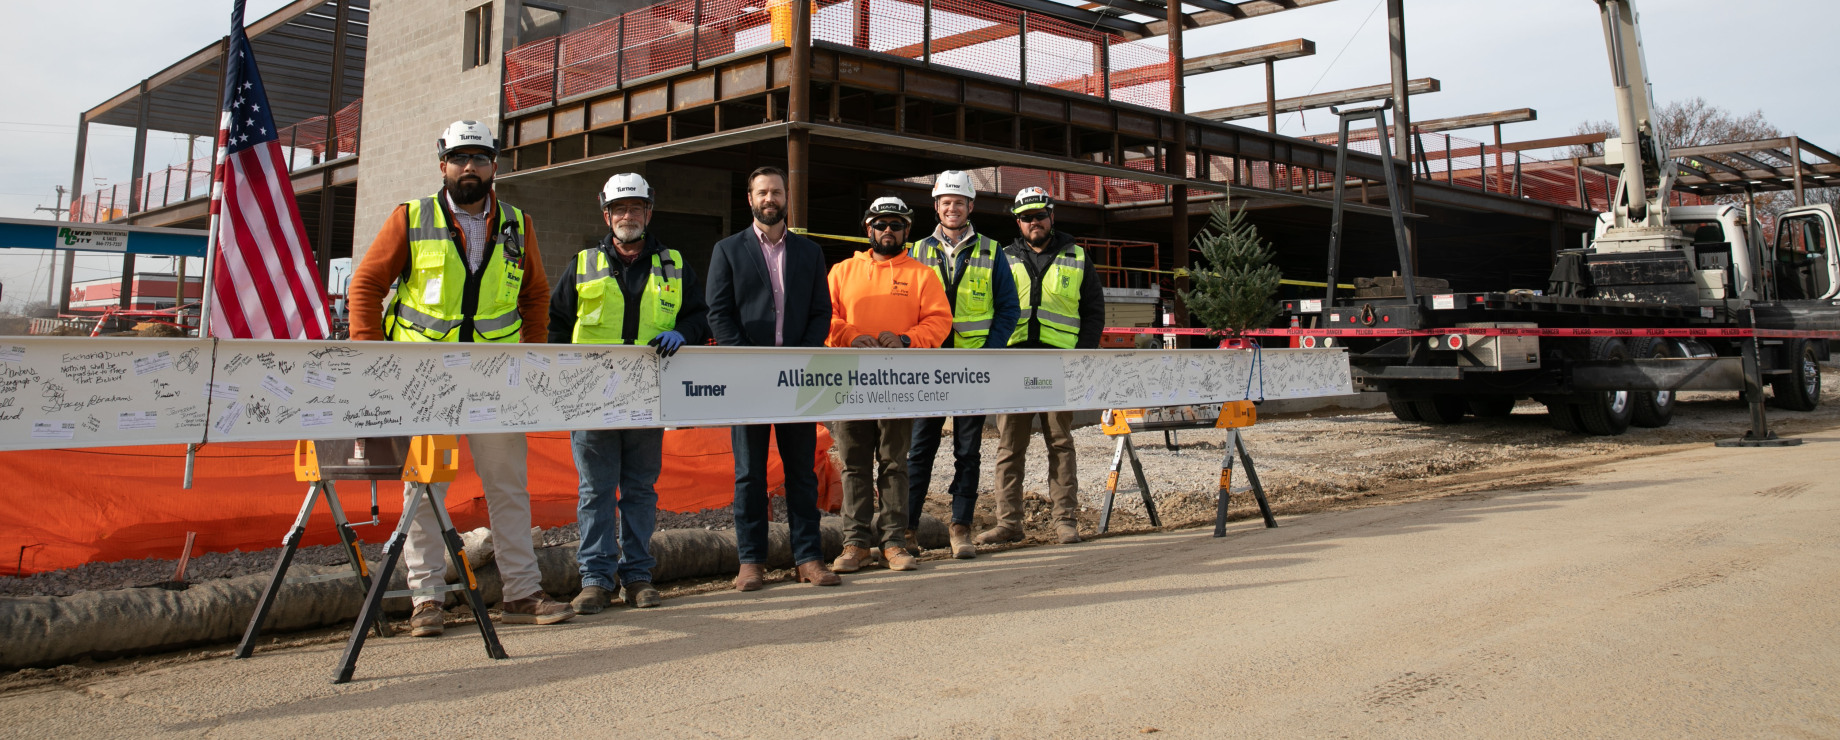 Celebrating milestones: Turner and Alliance Healthcare Services topping out ceremony